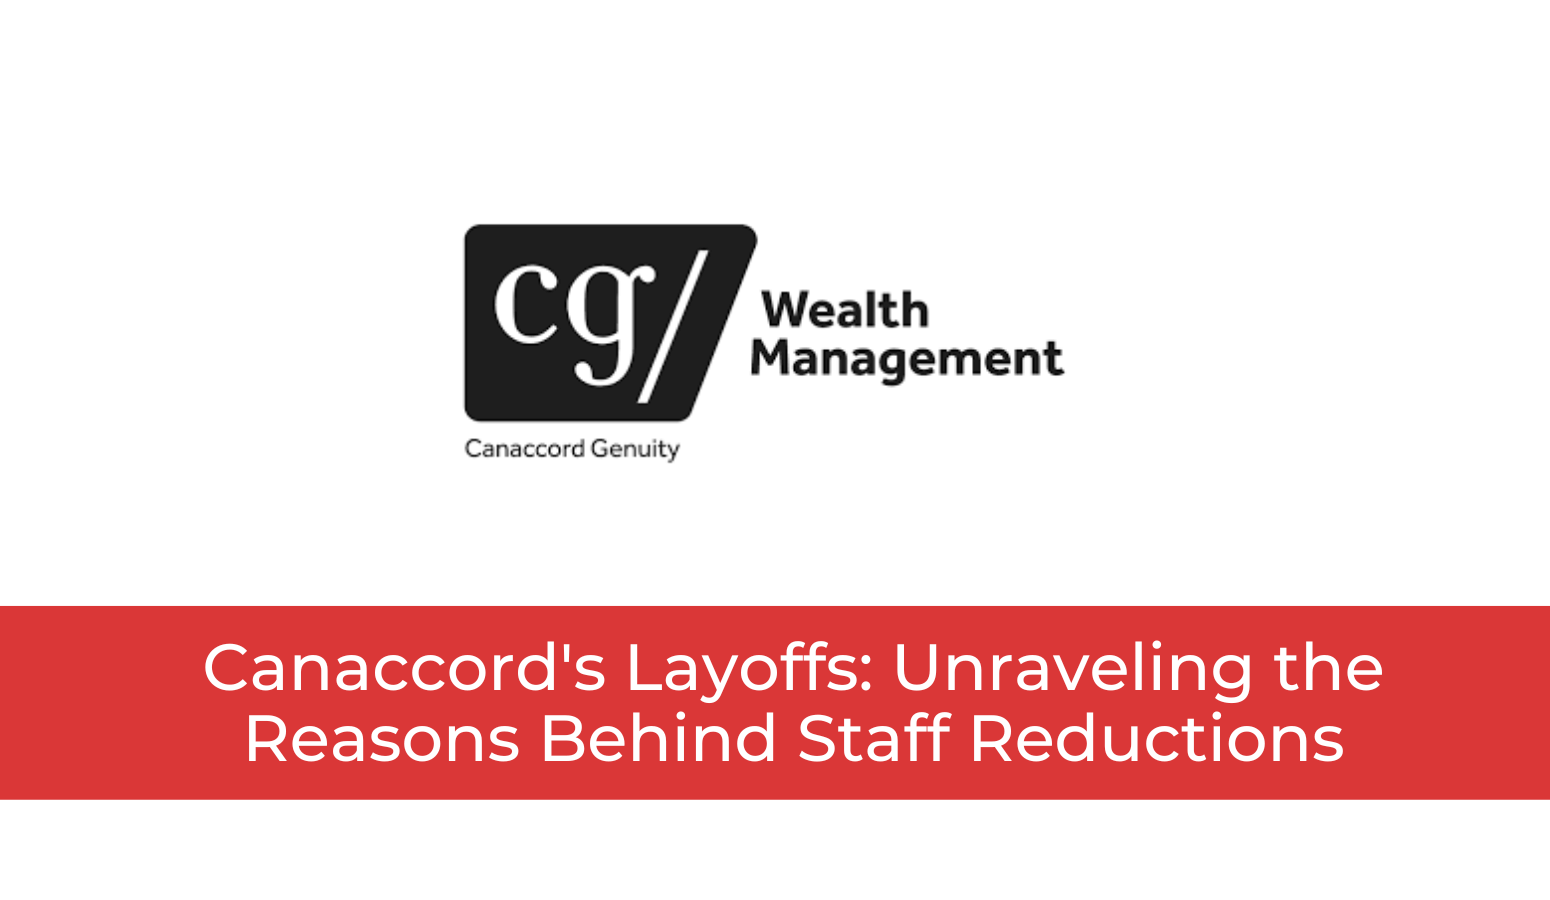 Featured image for “Canaccord’s Layoffs: Reasons Behind Staff Reductions”